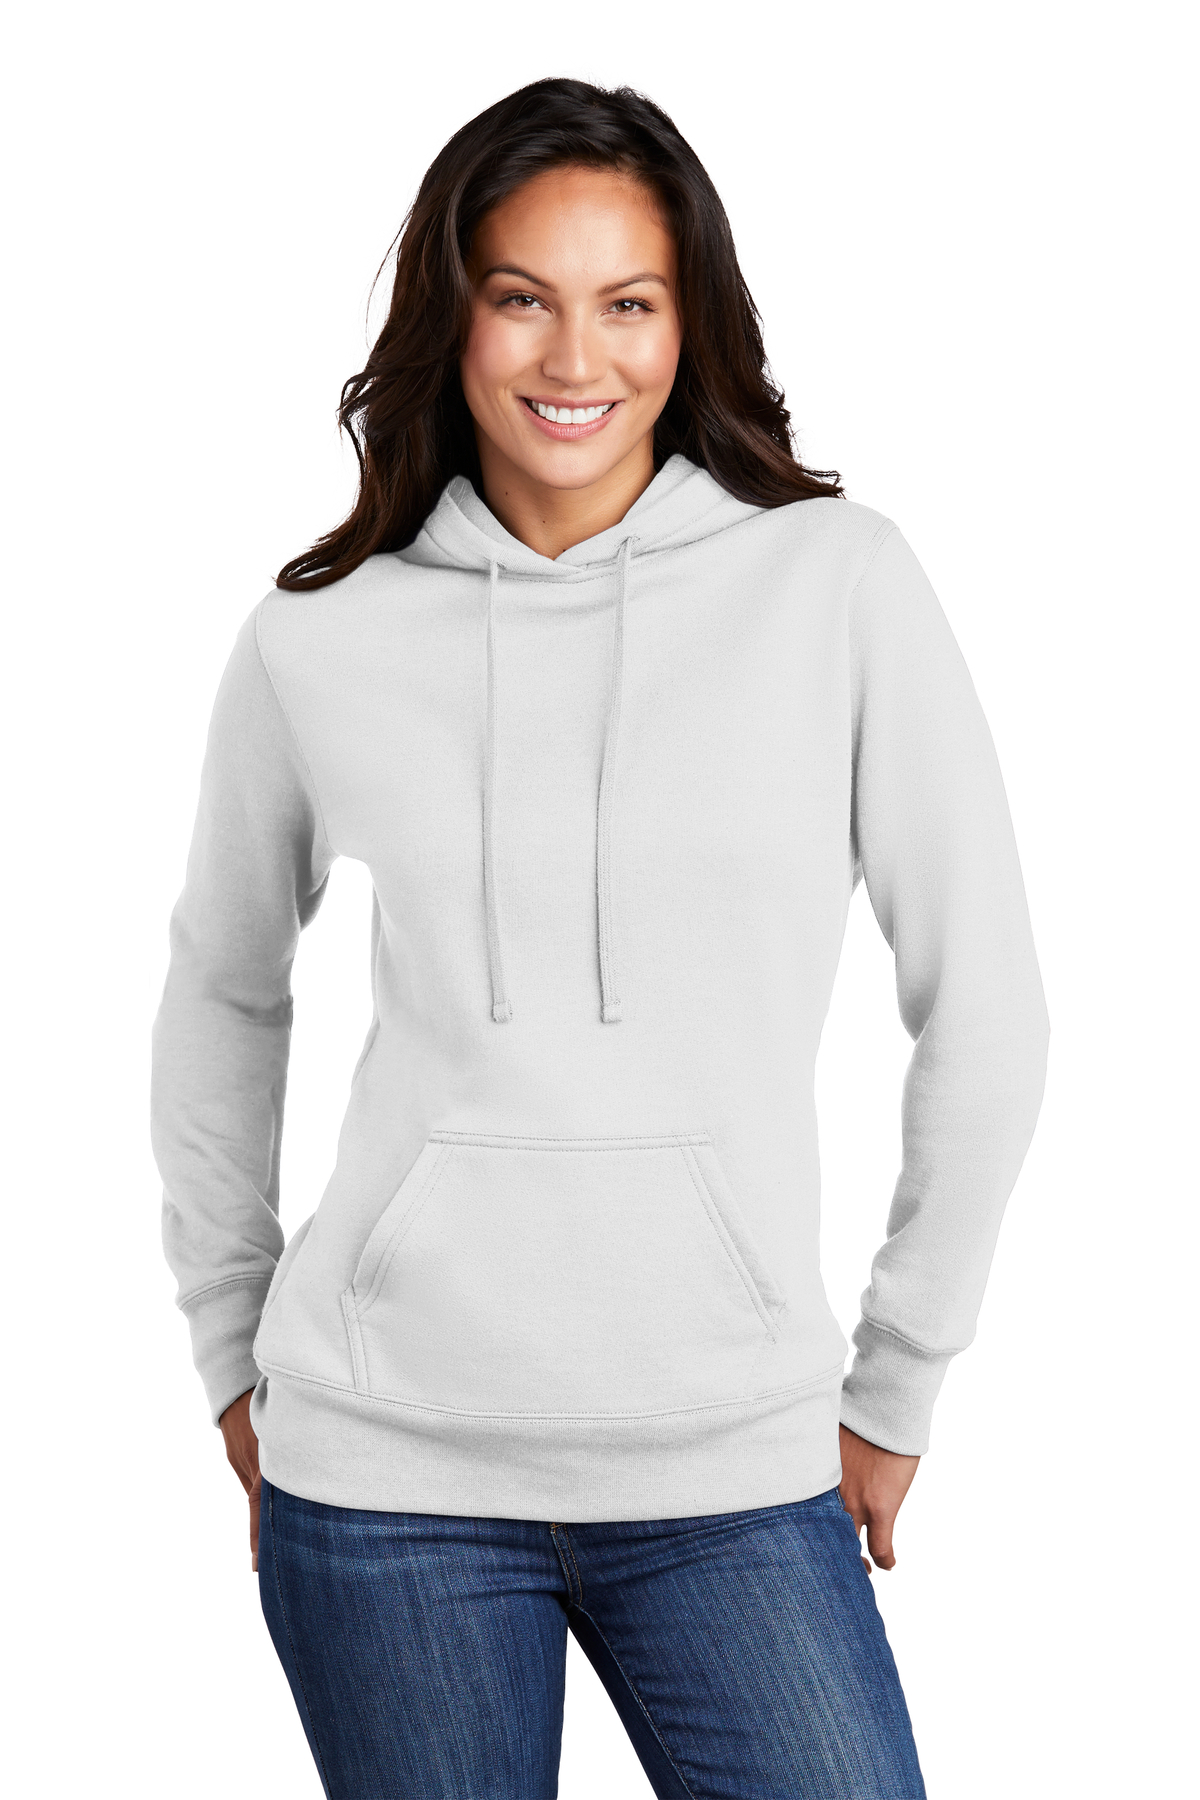 Port & Company Embroidered Women's Core Fleece Pullover Hooded ...